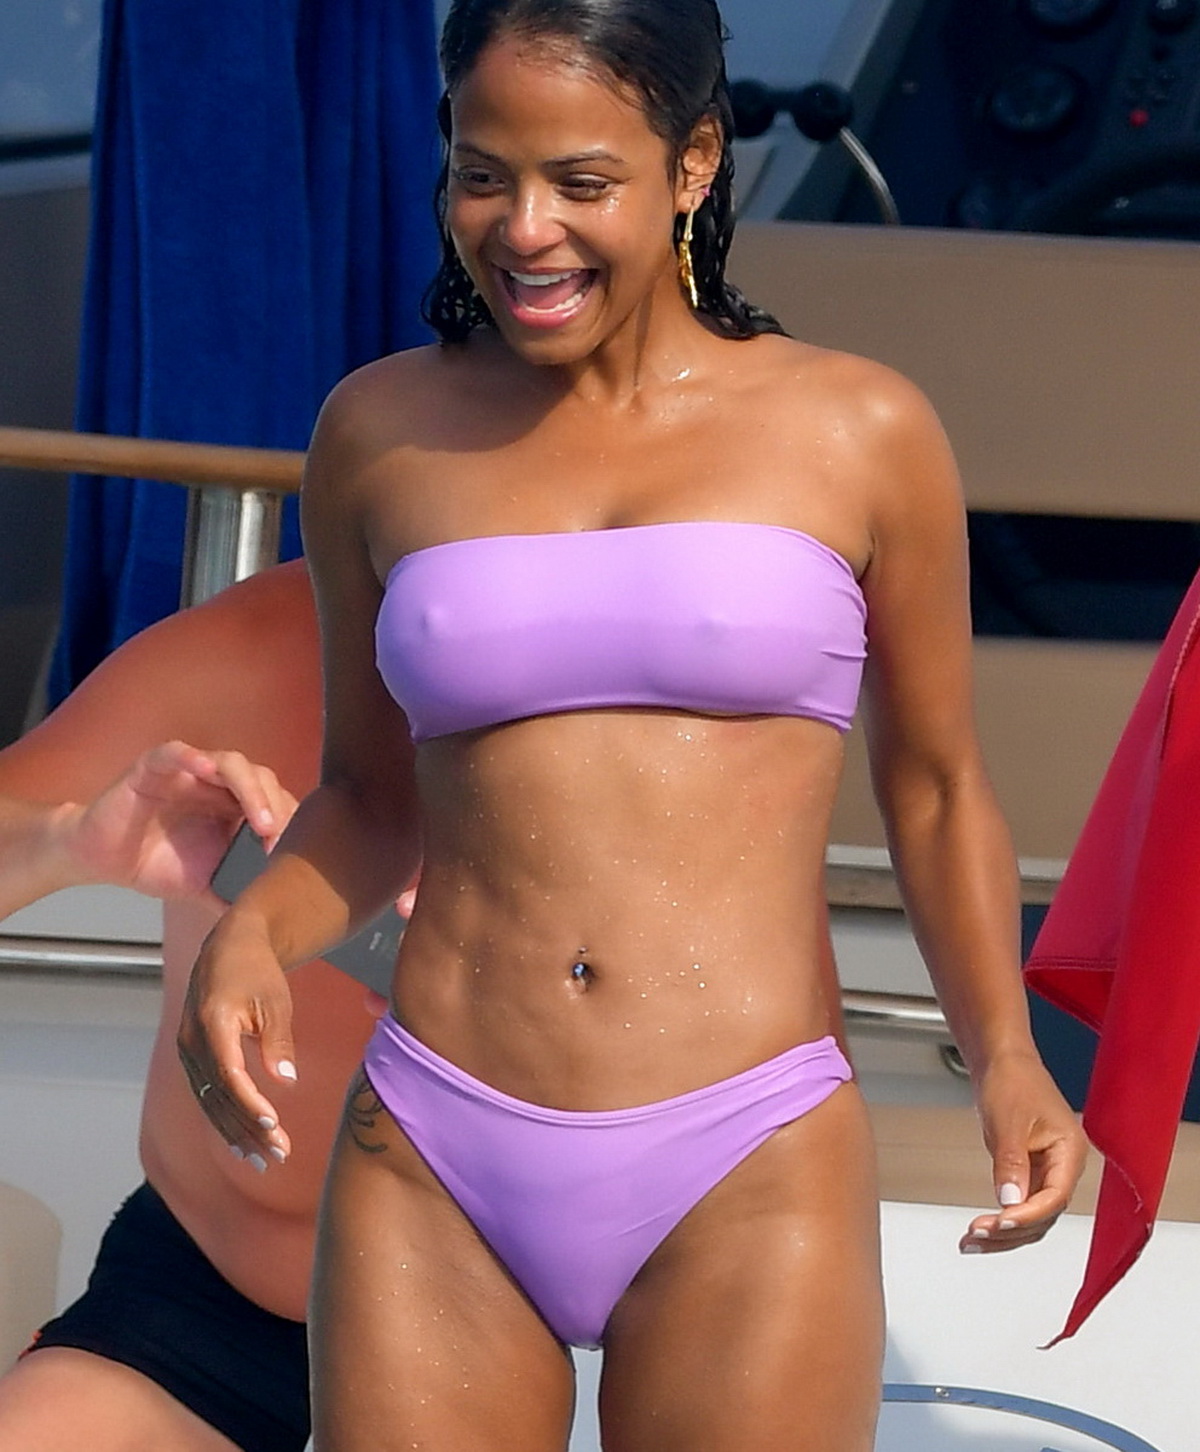 Christina Milian pokies and cameltoe in sexy bikini candids on a boat during holiday UHQ (1).jpg